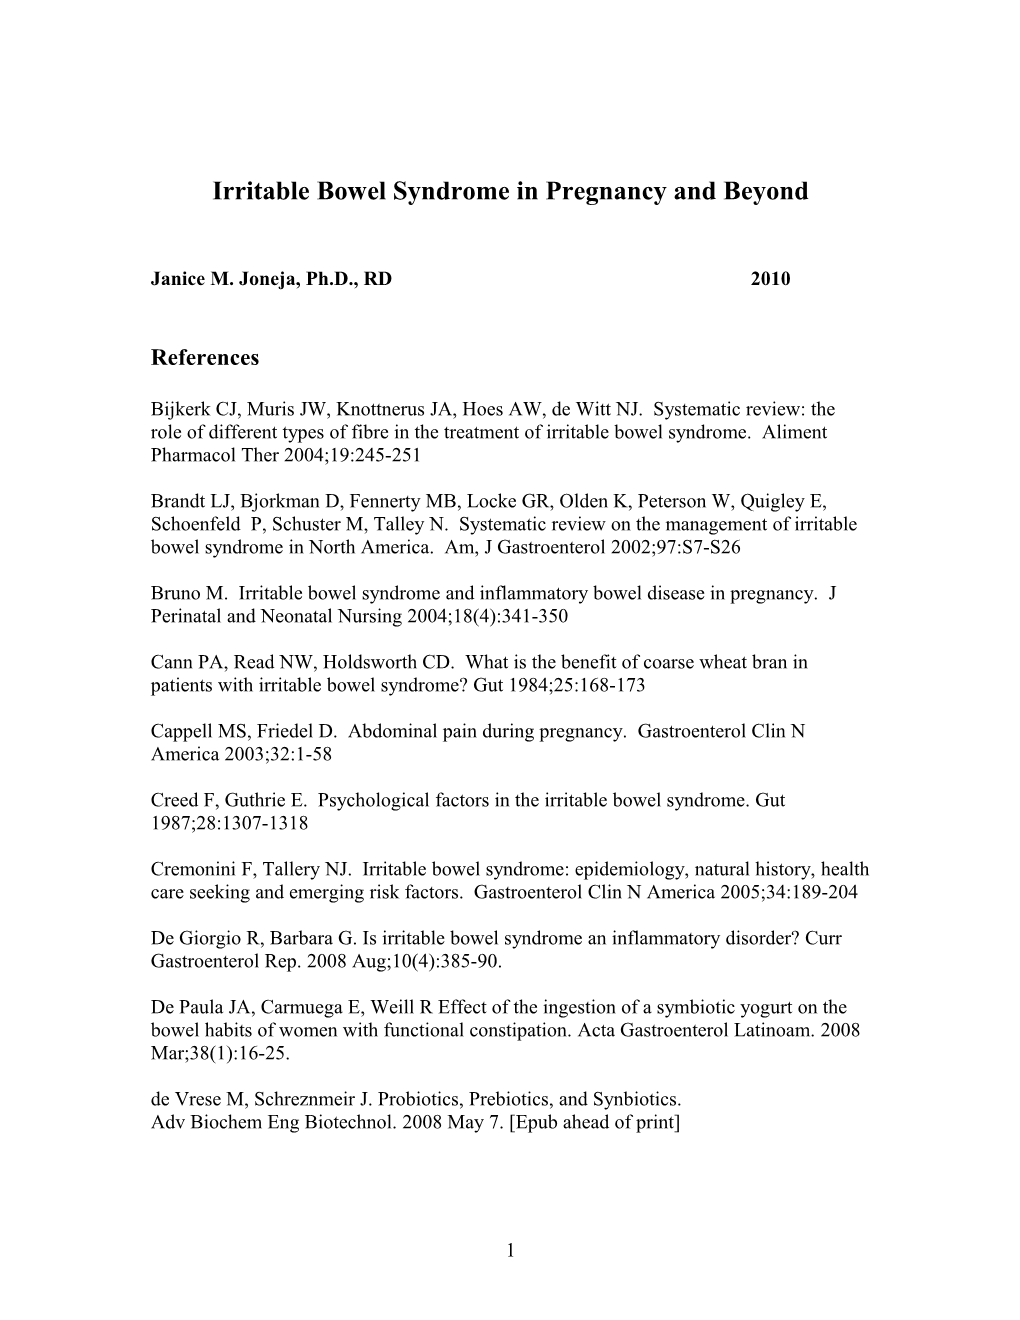 Irritable Bowel Syndrome in Pregnancy and Beyond